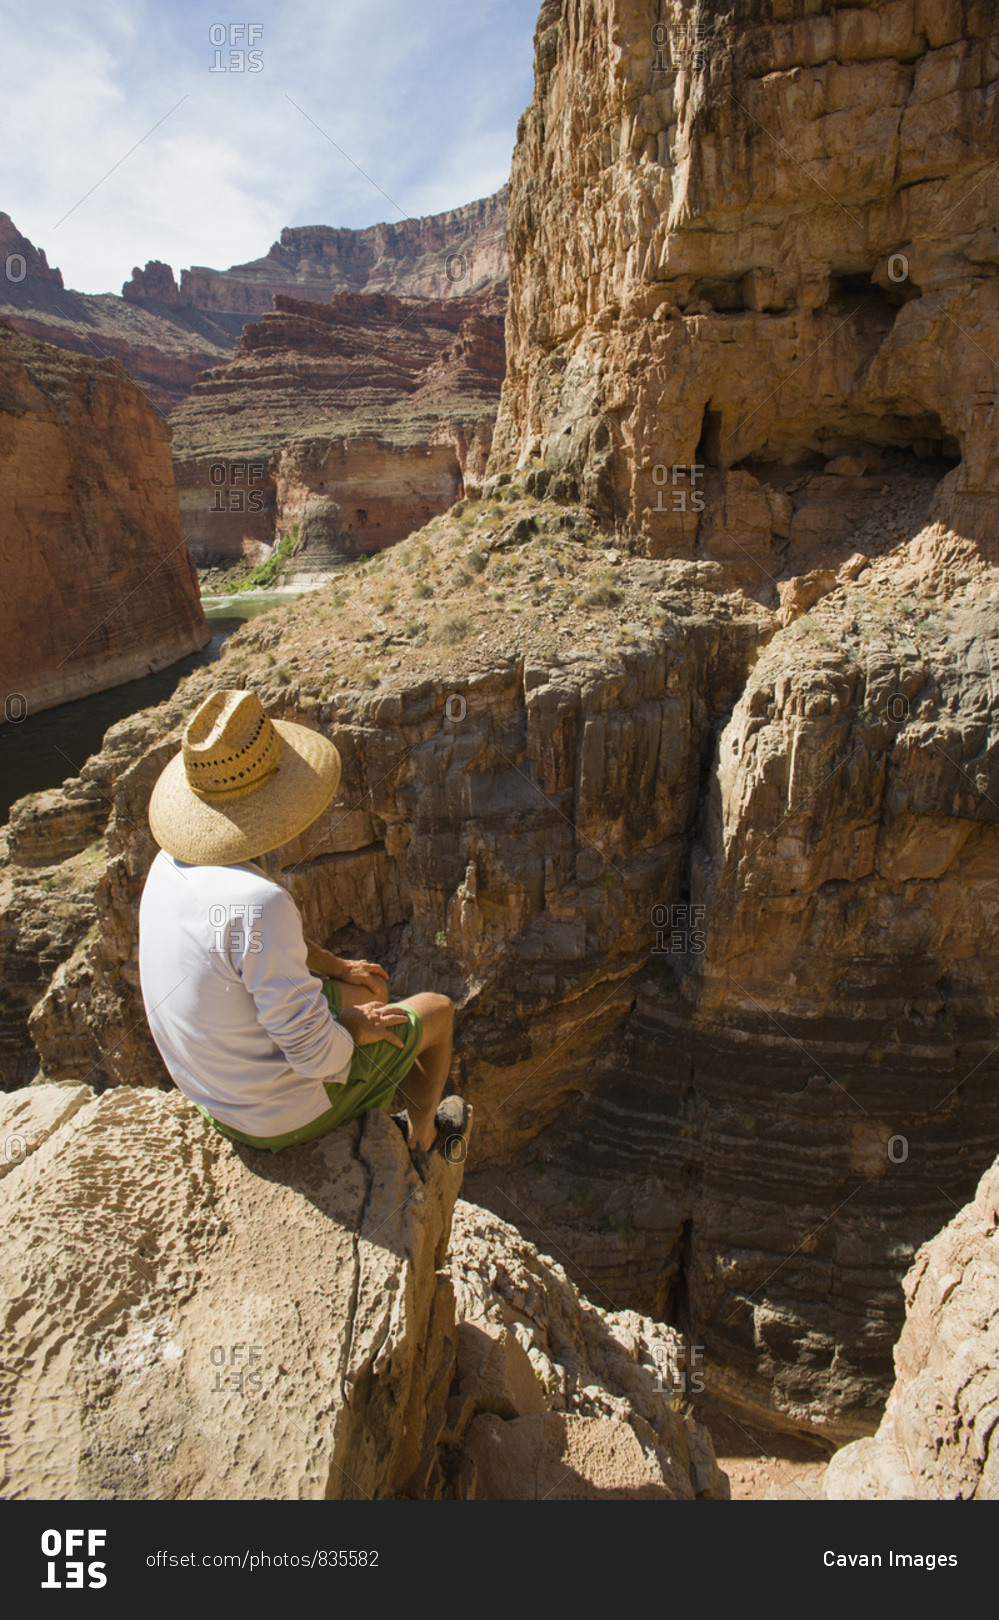 A man sits high on the rim of South Canyon, part of the Grand Canyon in Arizona.